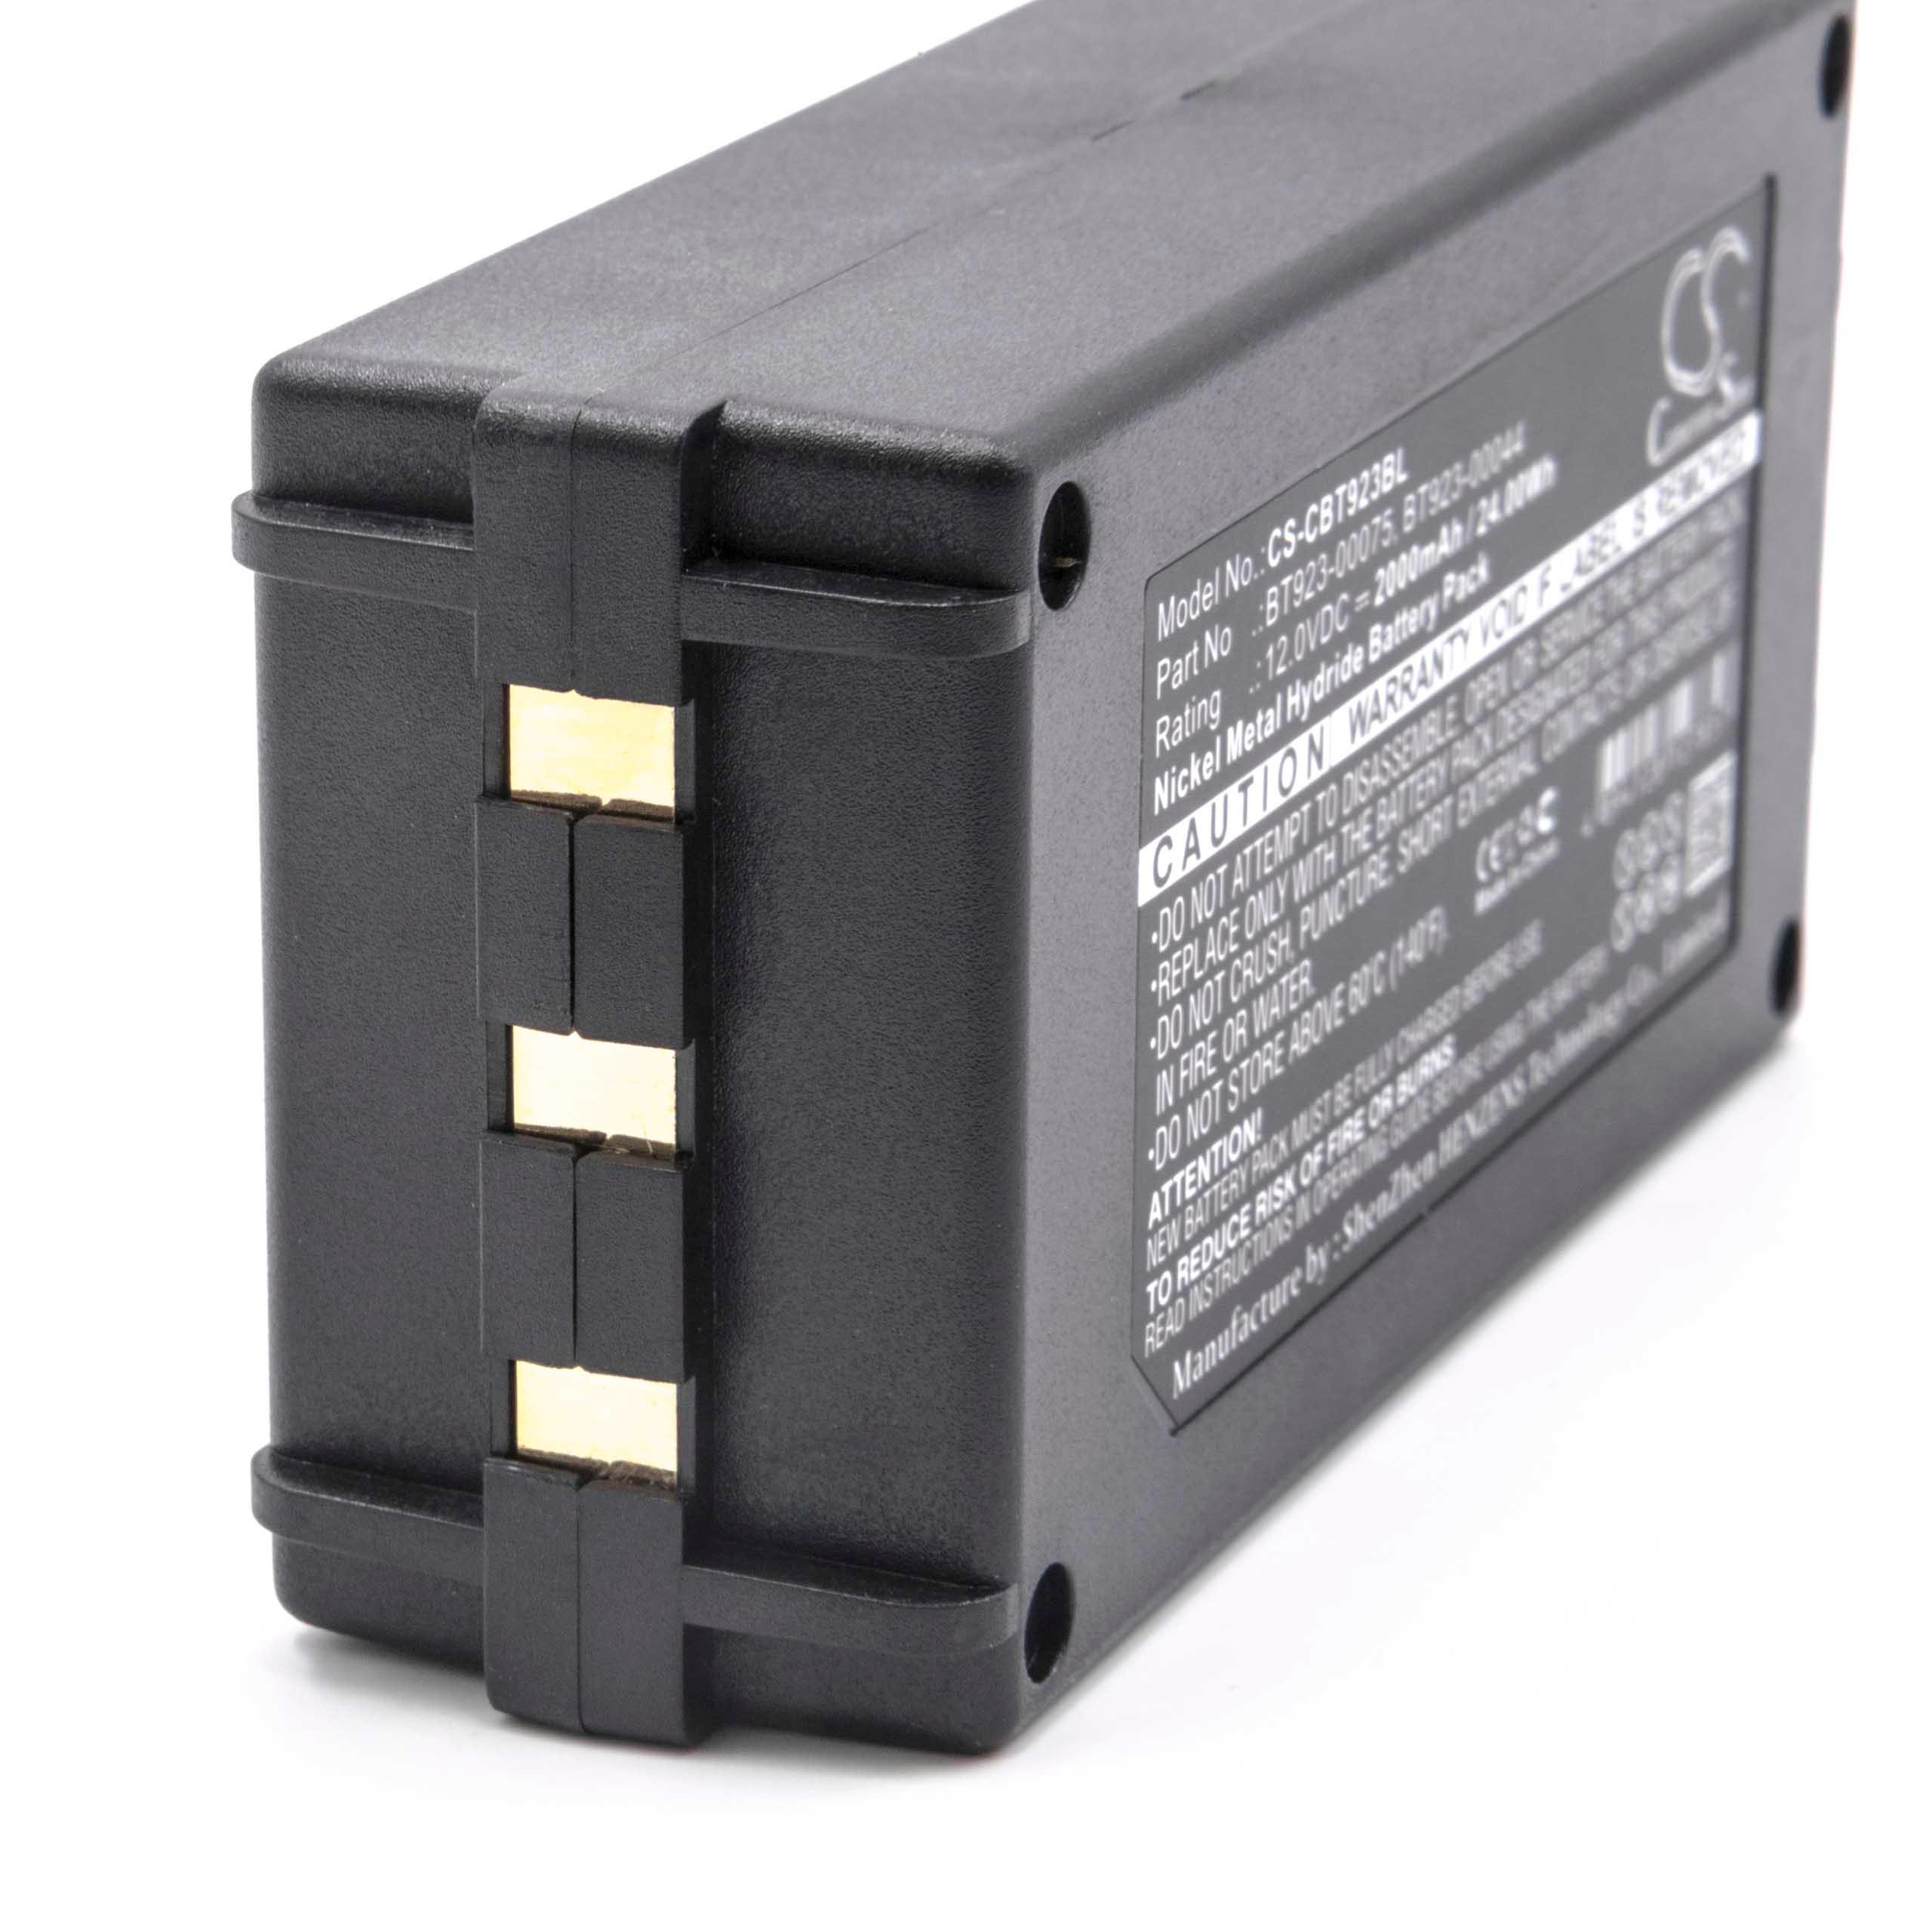 Industrial Remote Control Battery Replacement for Cattron-Theimeg BT081-00053 - 2000mAh 12V NiMH